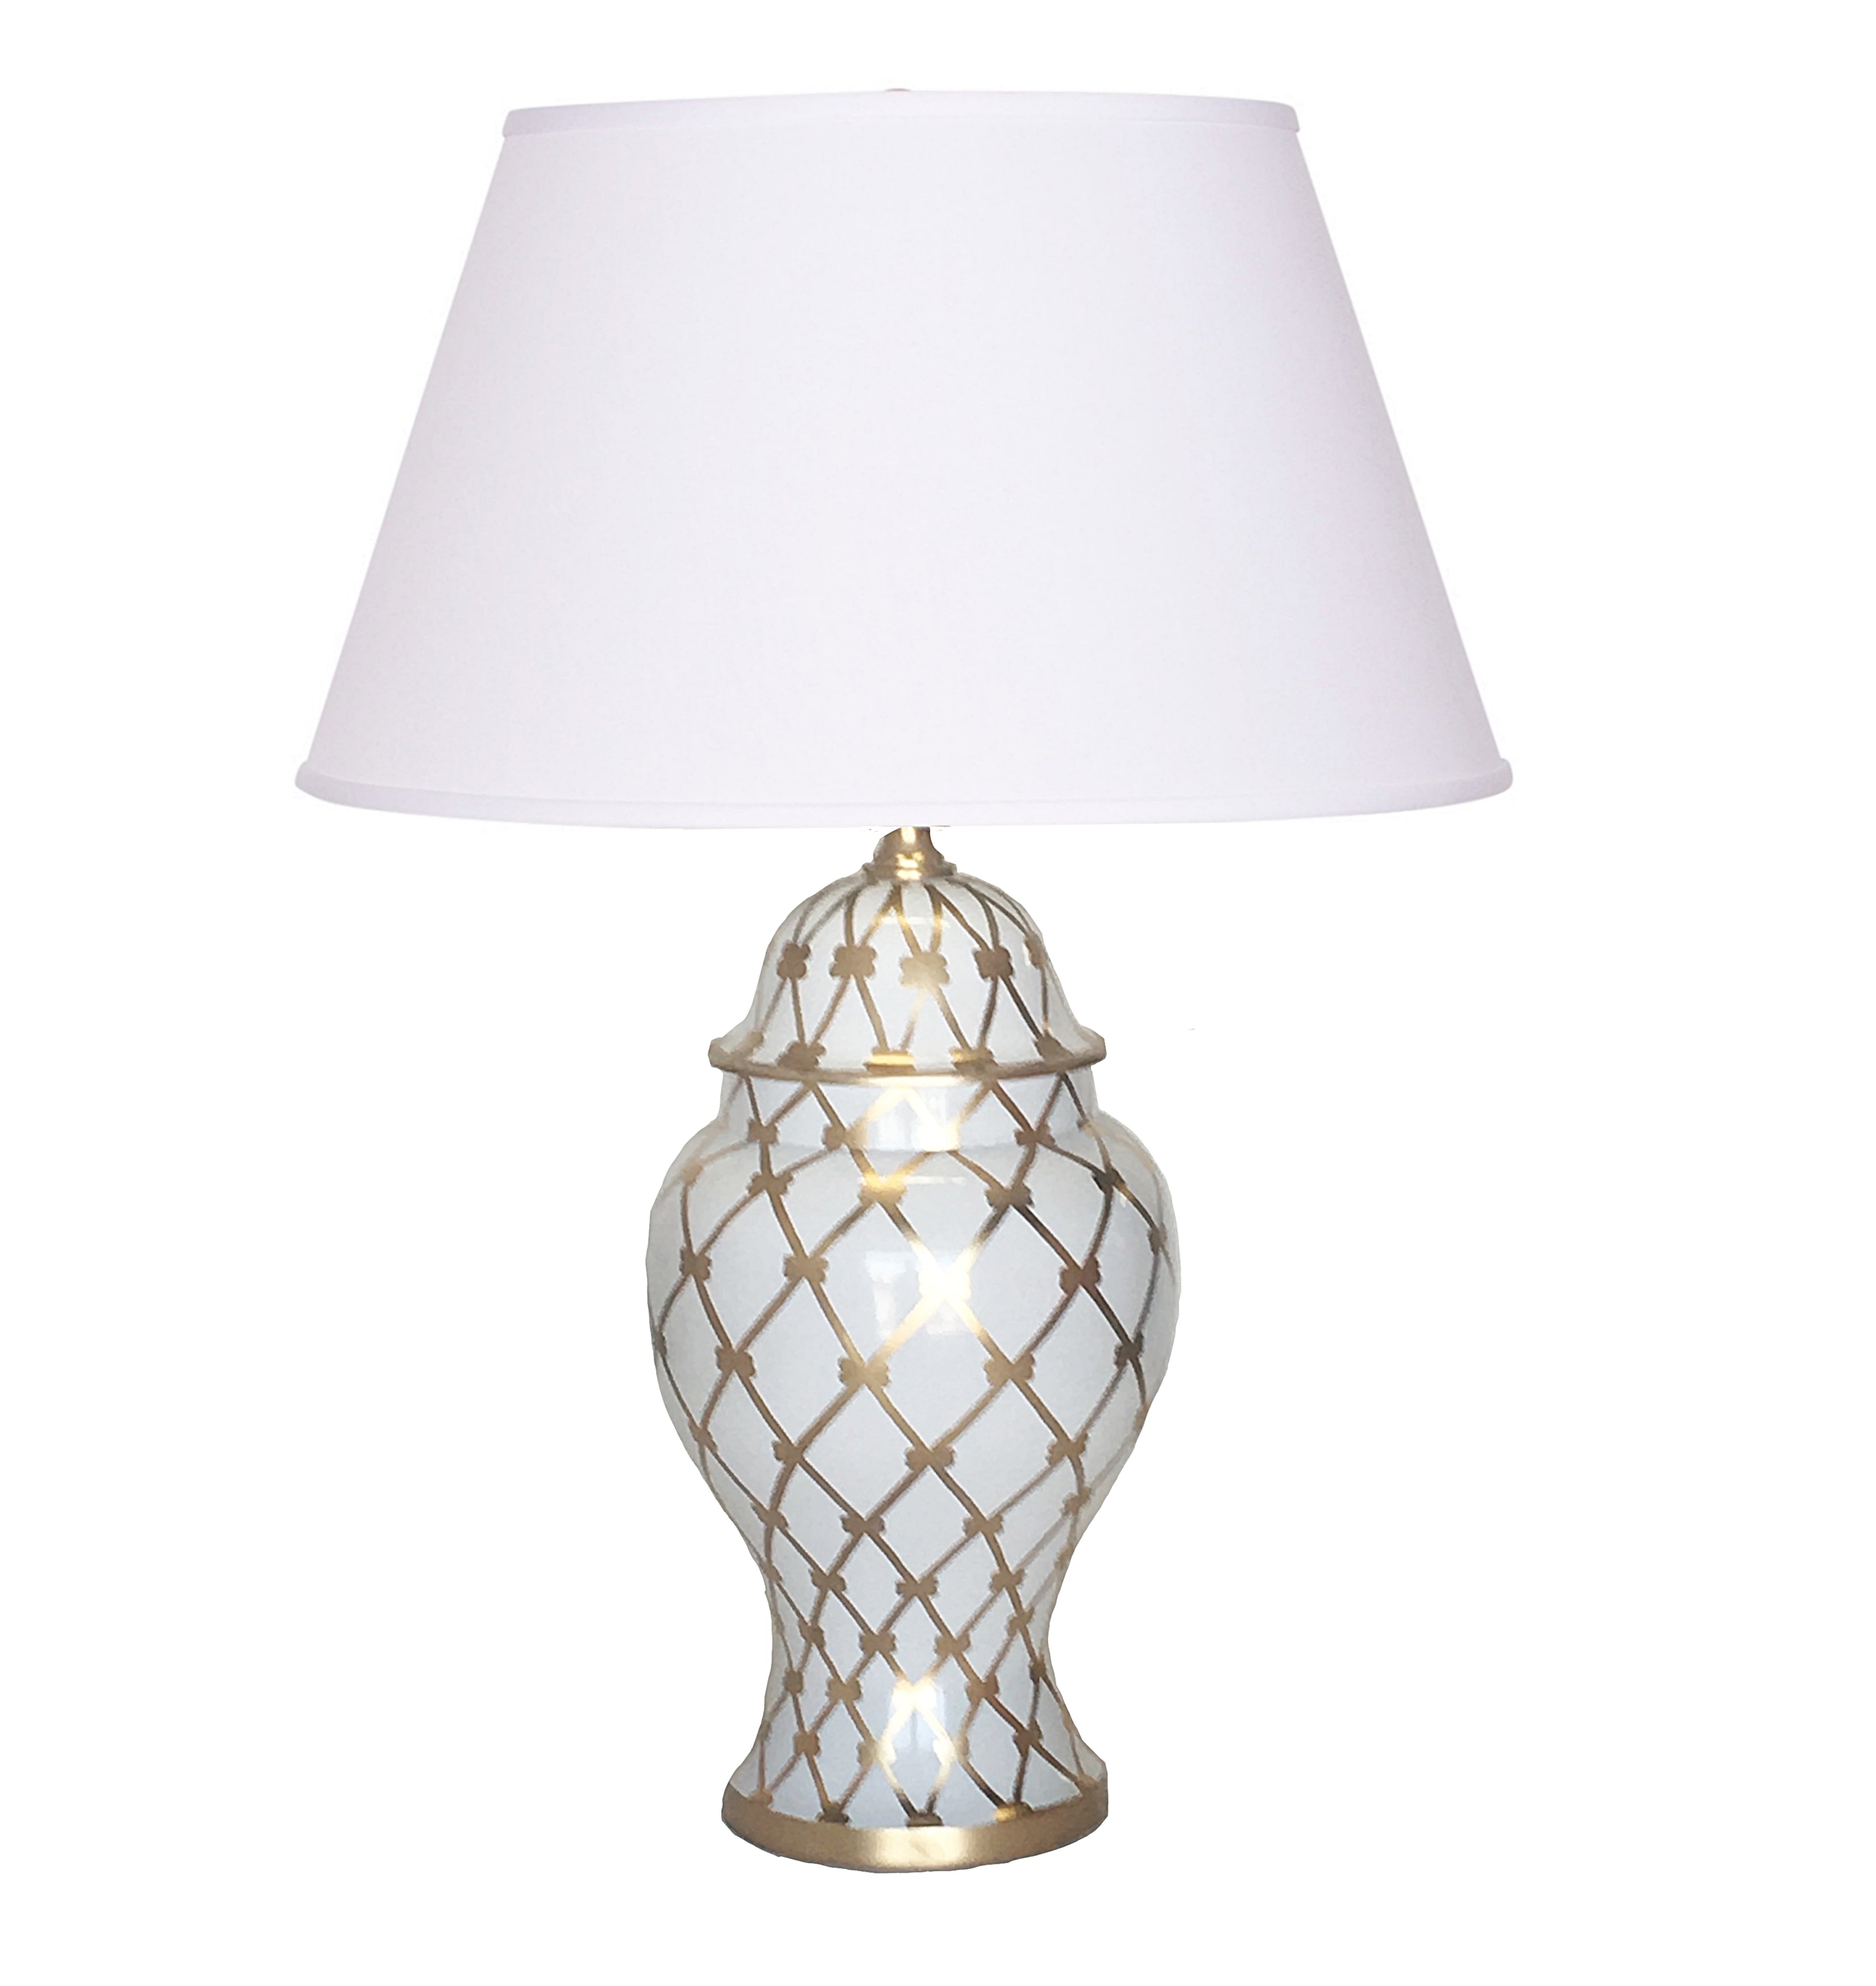 Dana Gibson French Twist in Gold Table Lamp